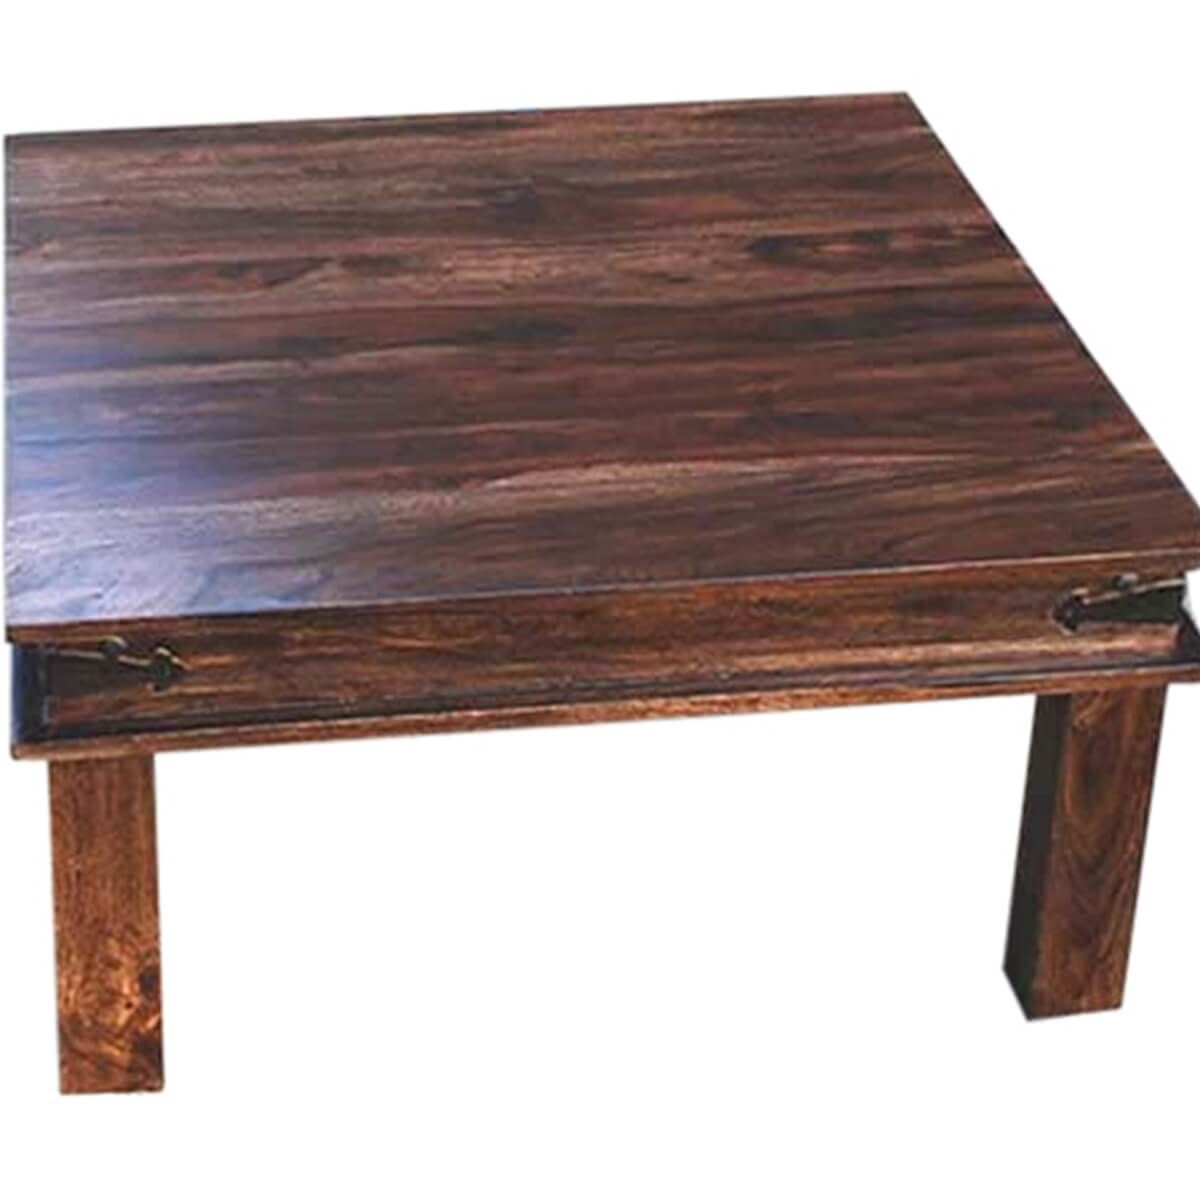 Rustic Solid Wood Square Cocktail Coffee Table Inside Rustic Espresso Wood Console Tables (Photo 4 of 20)